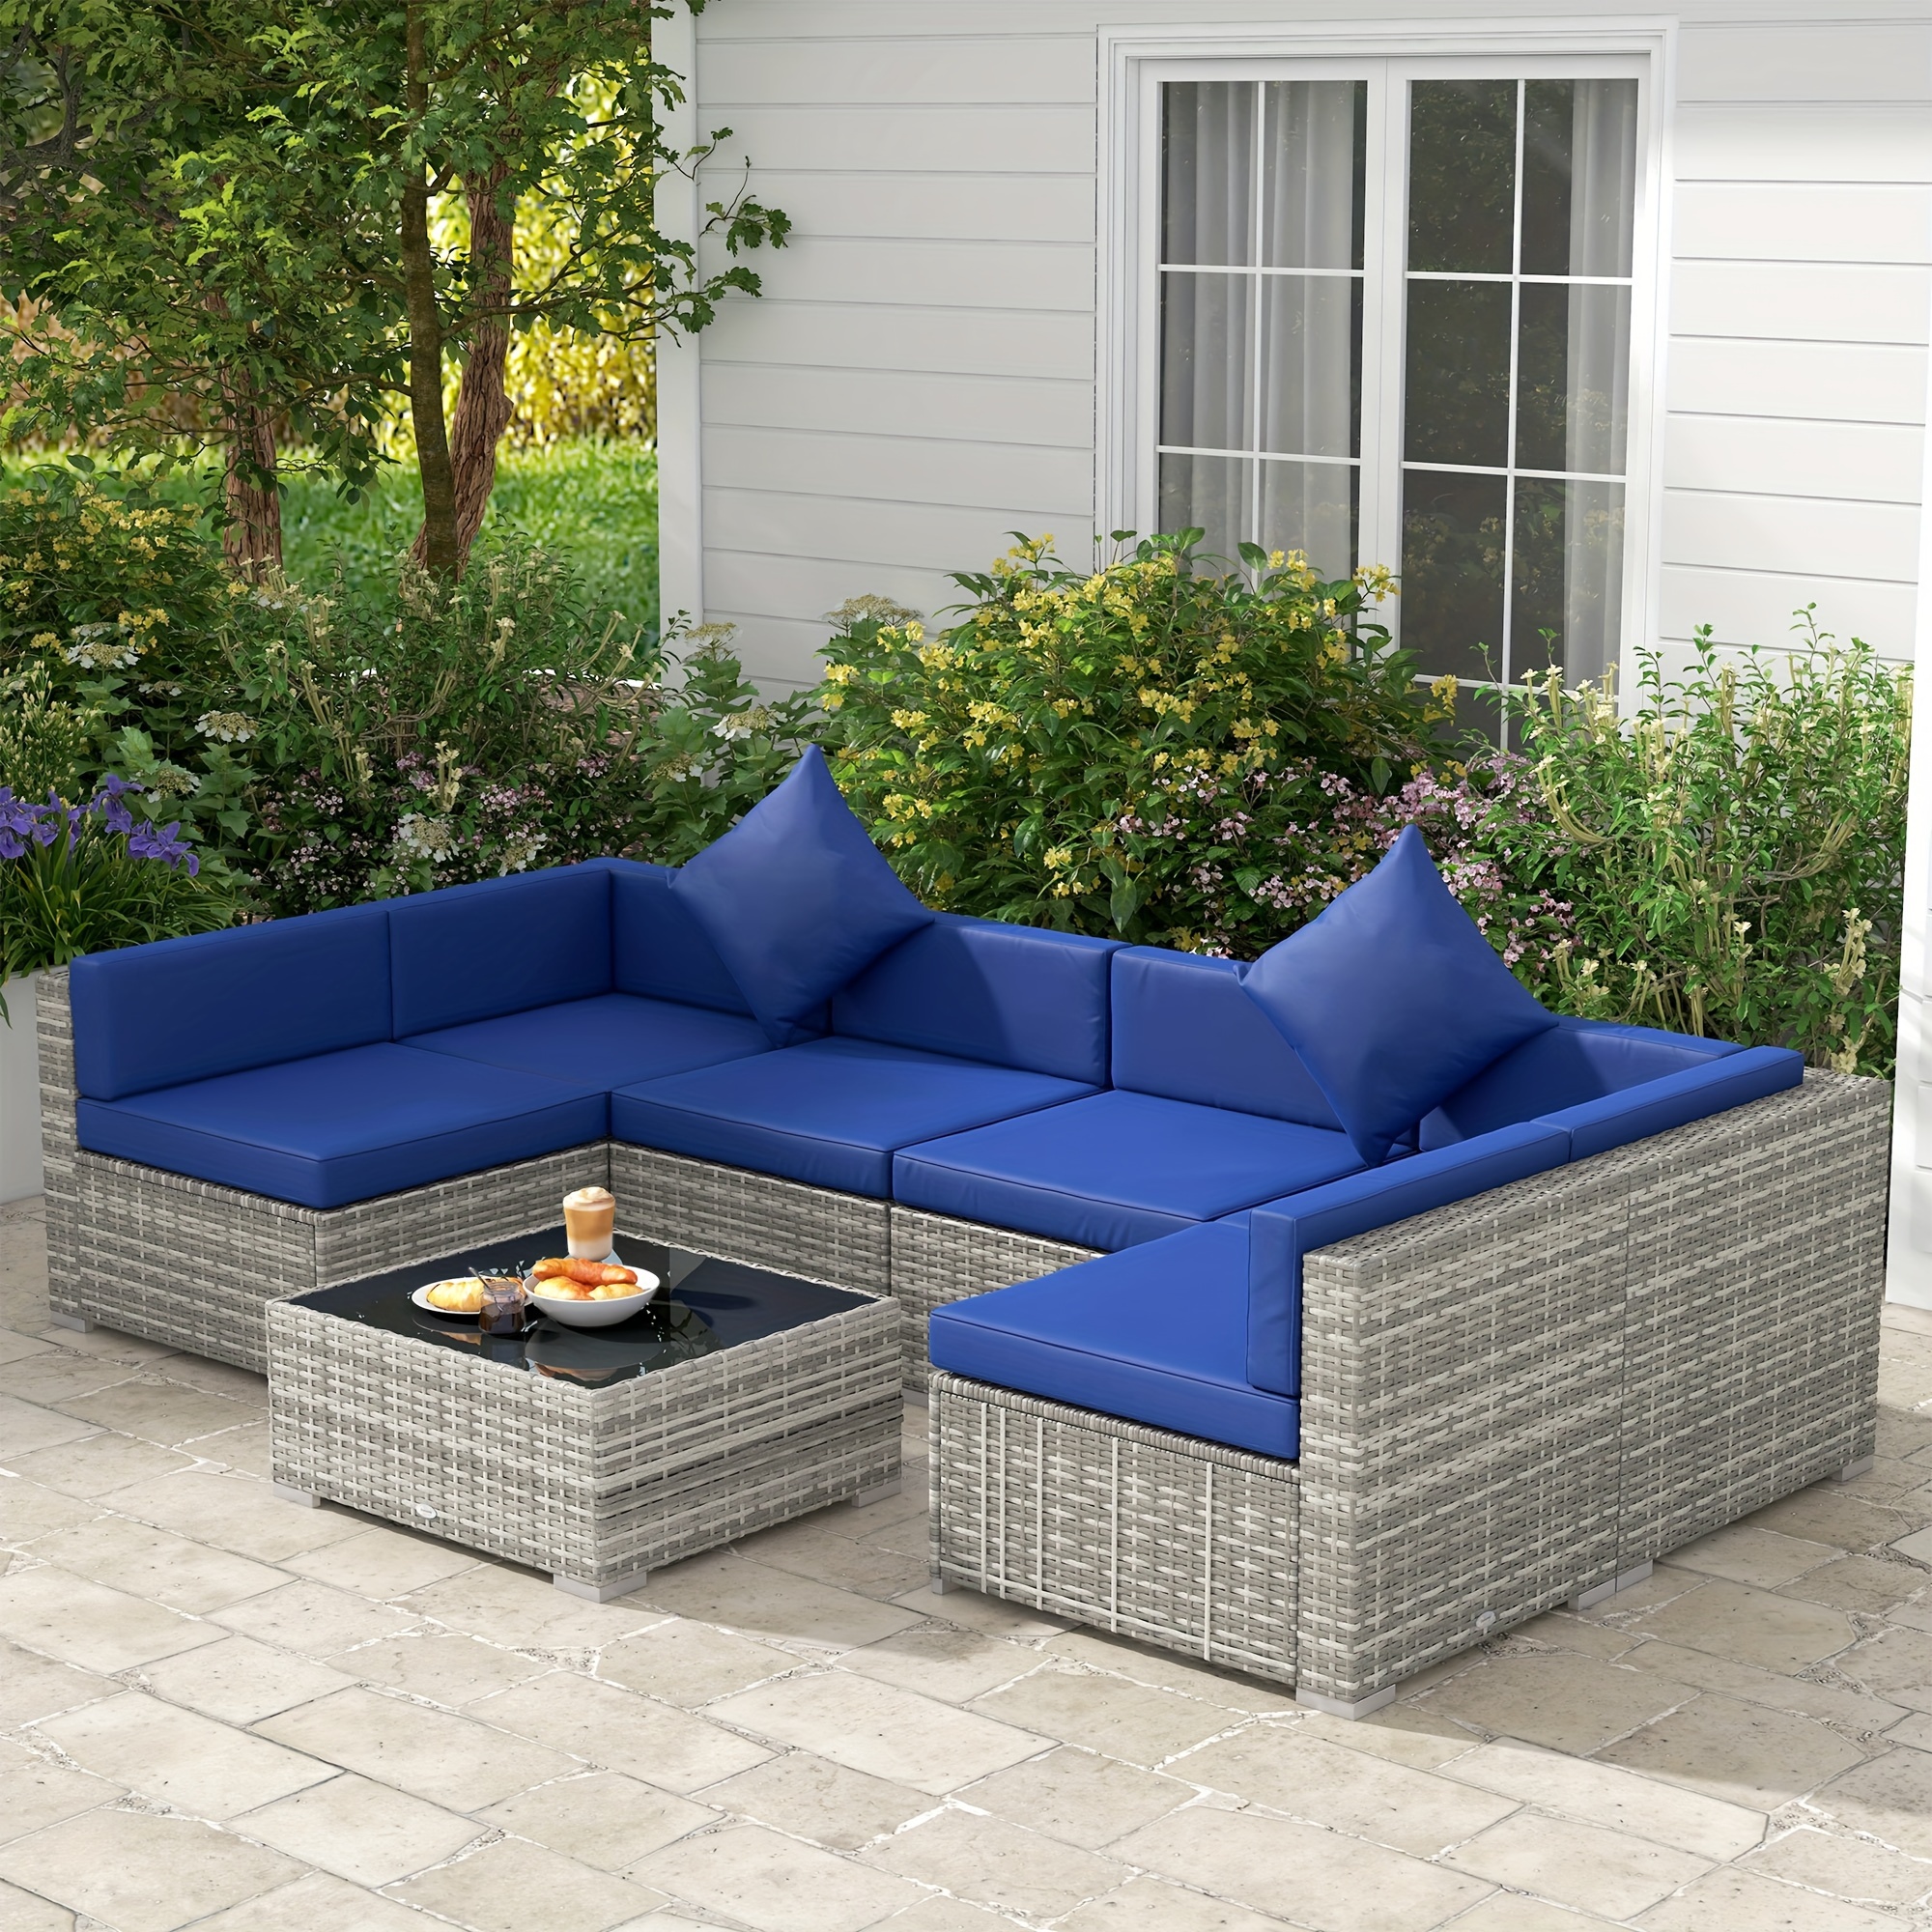 

Outsunny 7-piece Patio Furniture Set, Outdoor Wicker Conversation Set, All Weather Pe Rattan Sectional Sofa Set With Cushions And Tempered Glass Top Coffee Table, Pillows, Blue